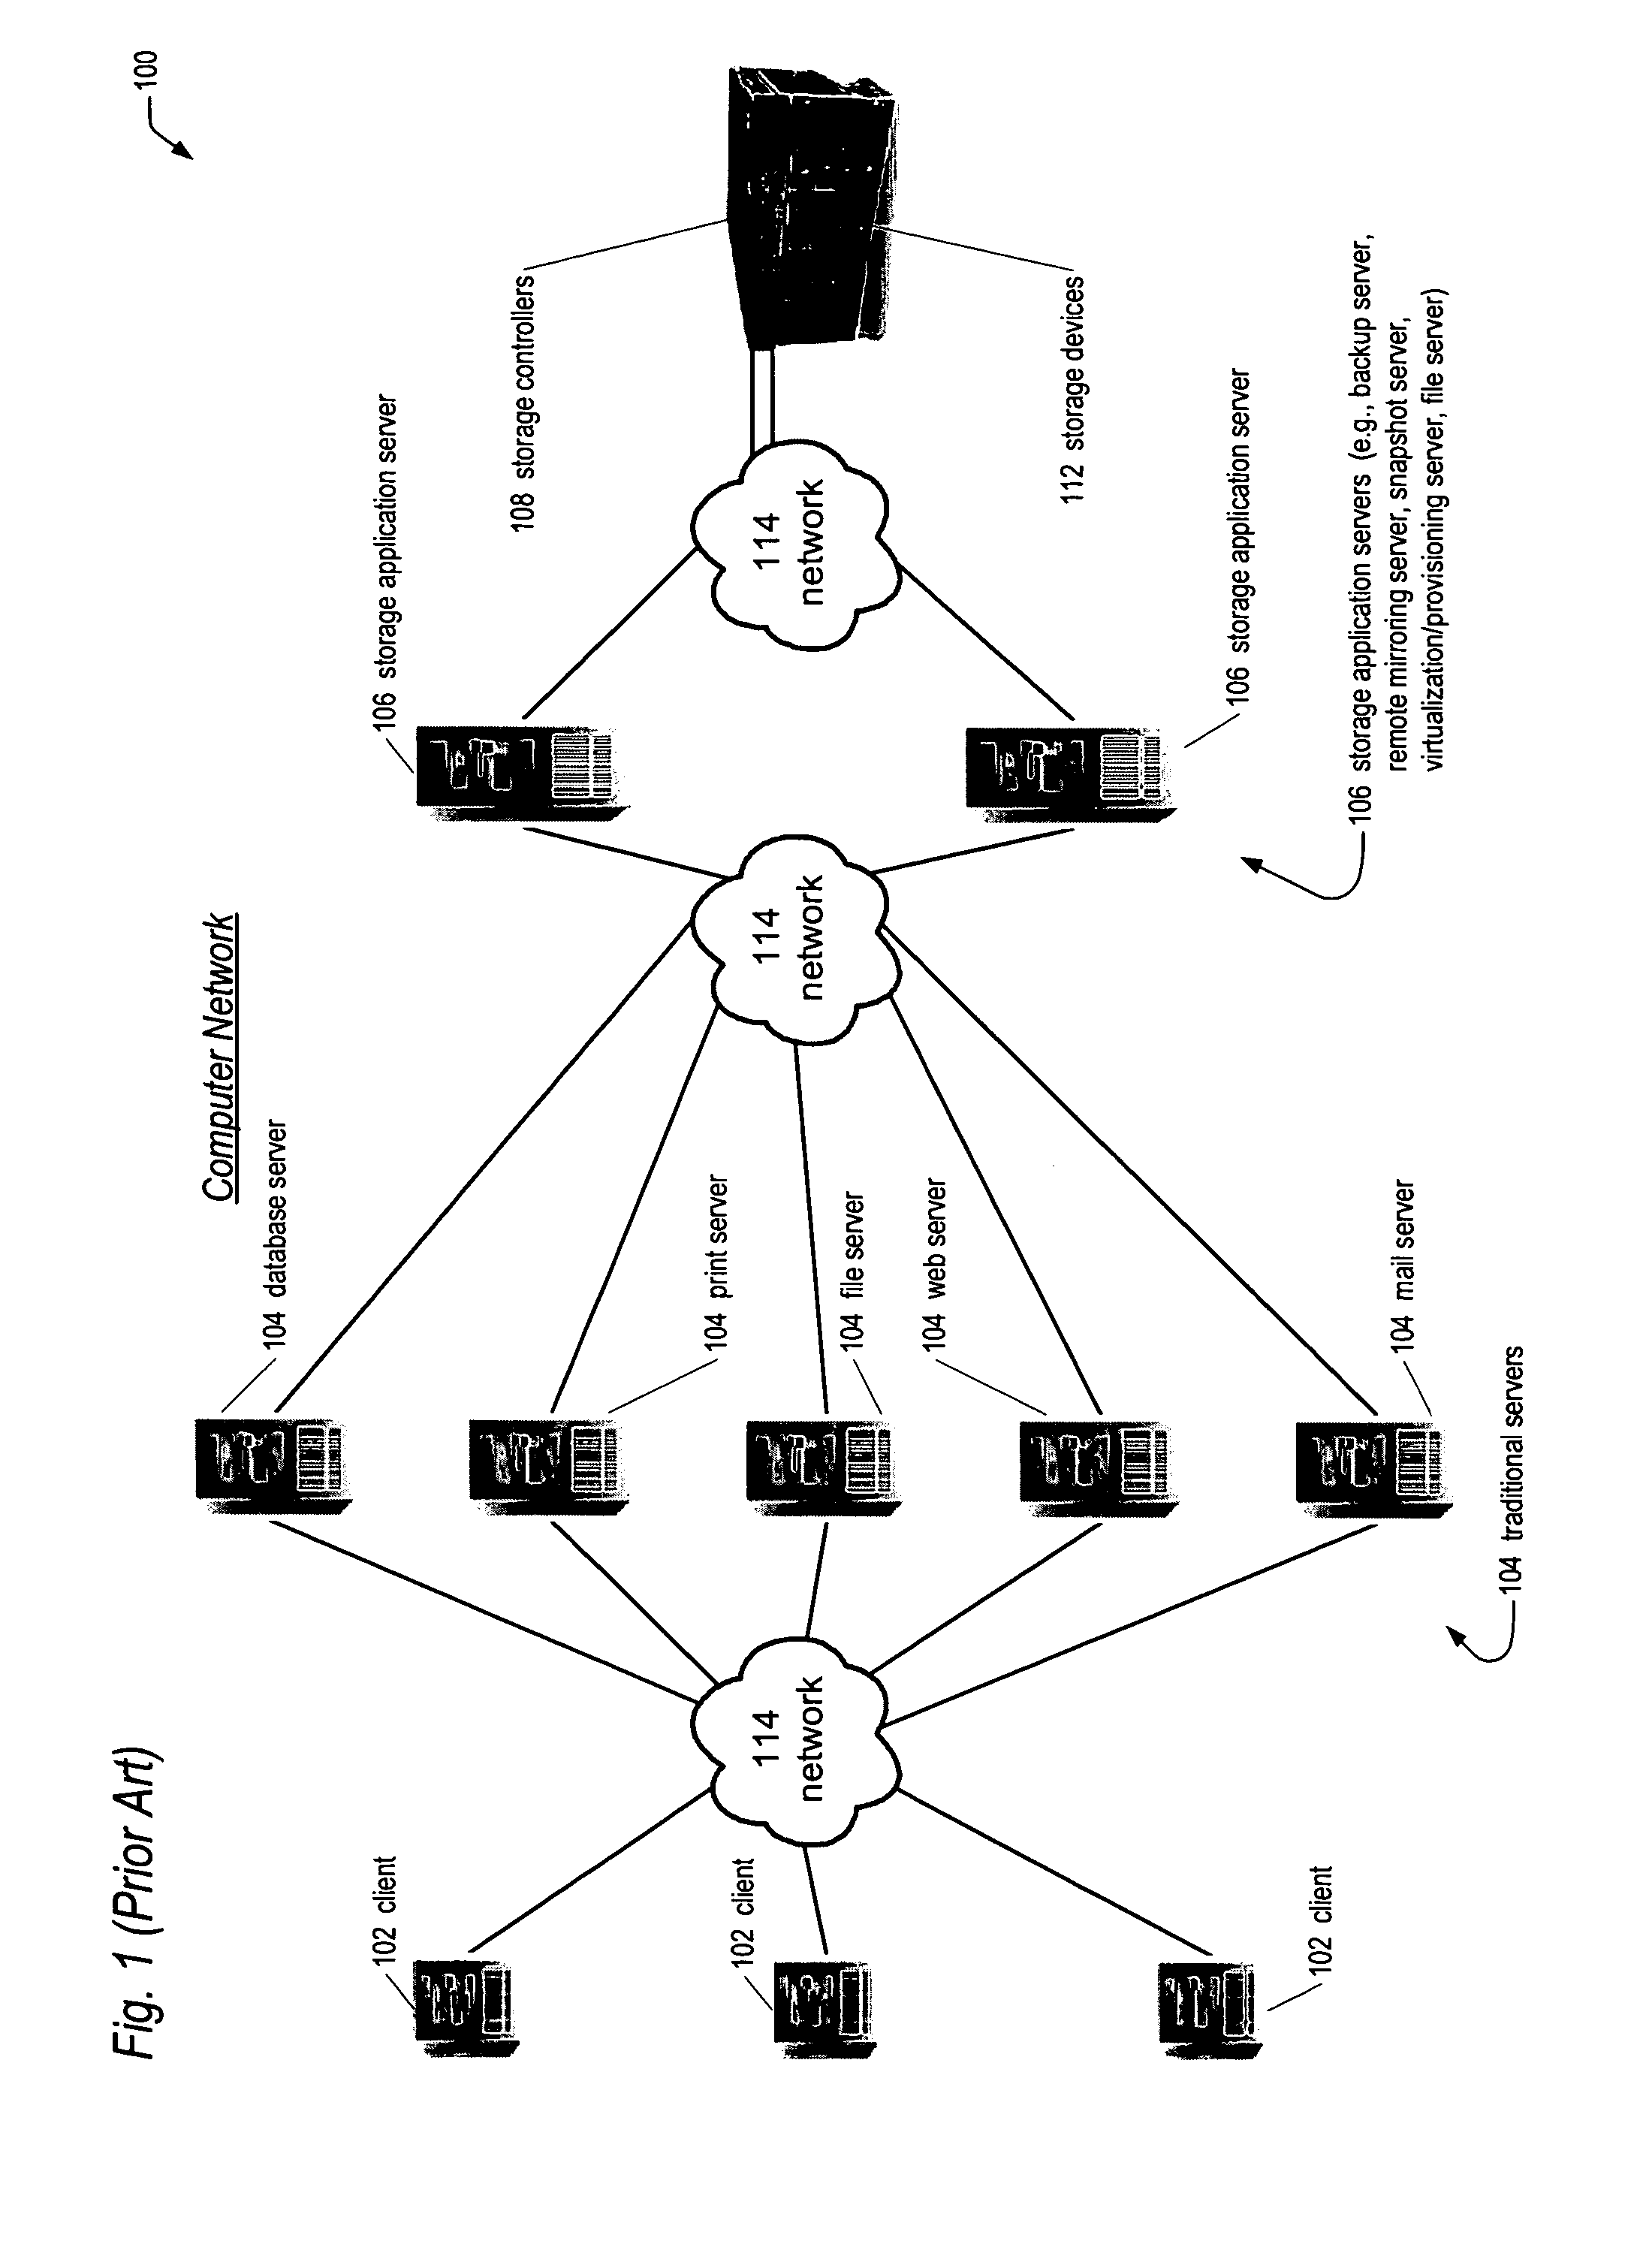 Apparatus and method for a server deterministically killing a redundant server integrated within the same network storage appliance chassis